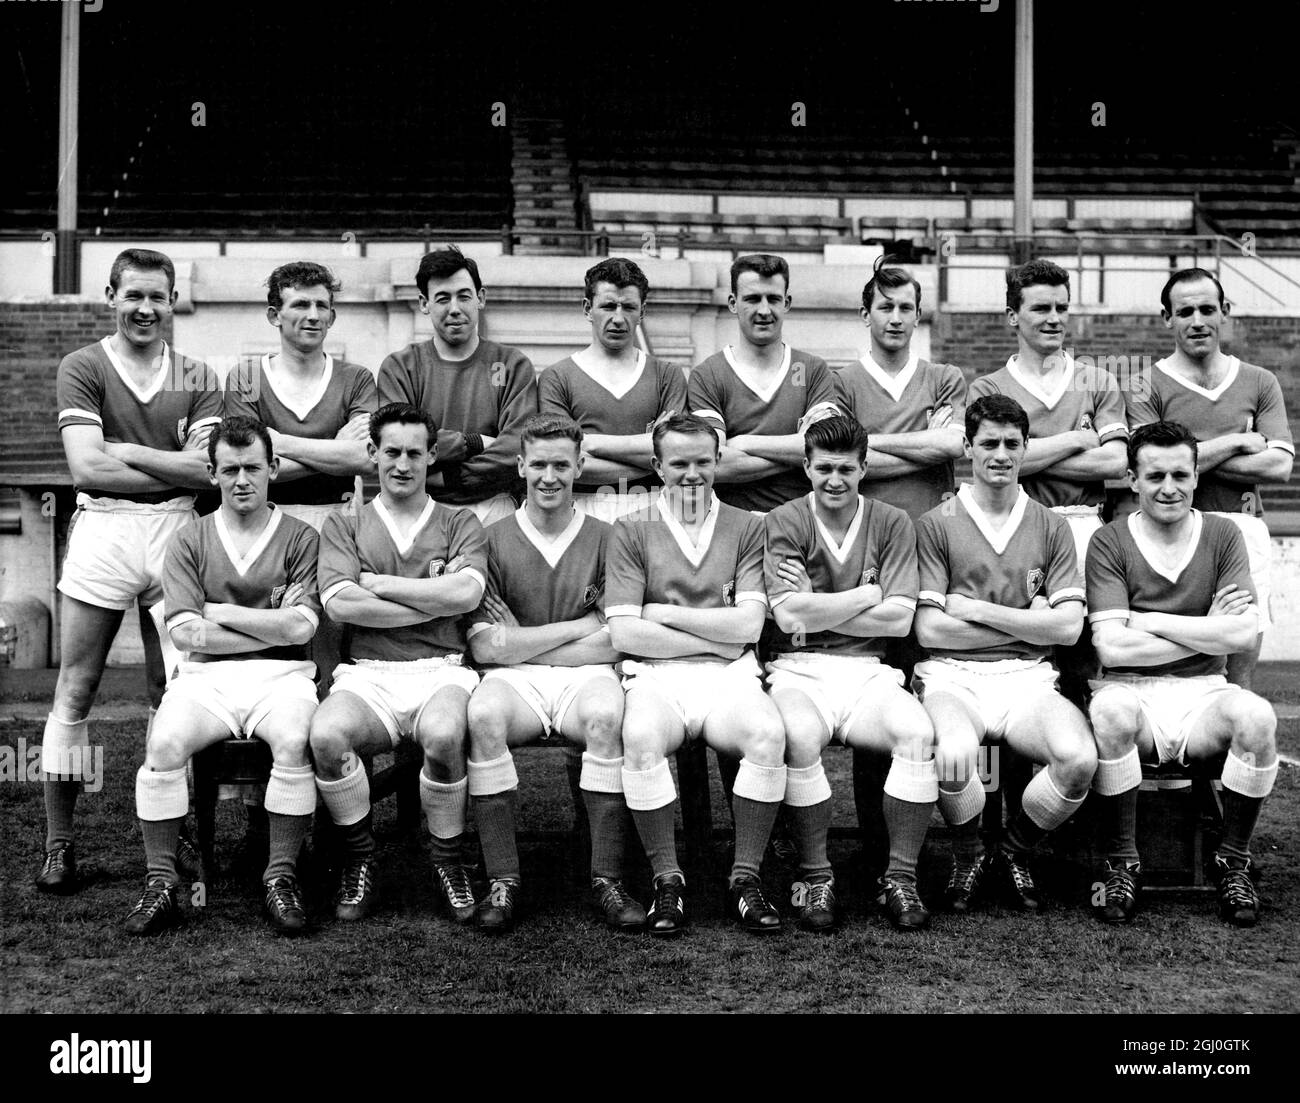 1961 FA Cup finalists, Leicester City FC who will play Tottenham Hotspur at Wembley Stadium. (left to right back row) A Knapp, C Appleton, Gordon Banks, L Chalmers, I King, G Wills, R Norman, D Hinds. (left to right front row) G Meek, H Riley, J Walsh, I White, A Cheesebrough, Frank McLintock and K Keyworth. 18th April 1961 Stock Photo